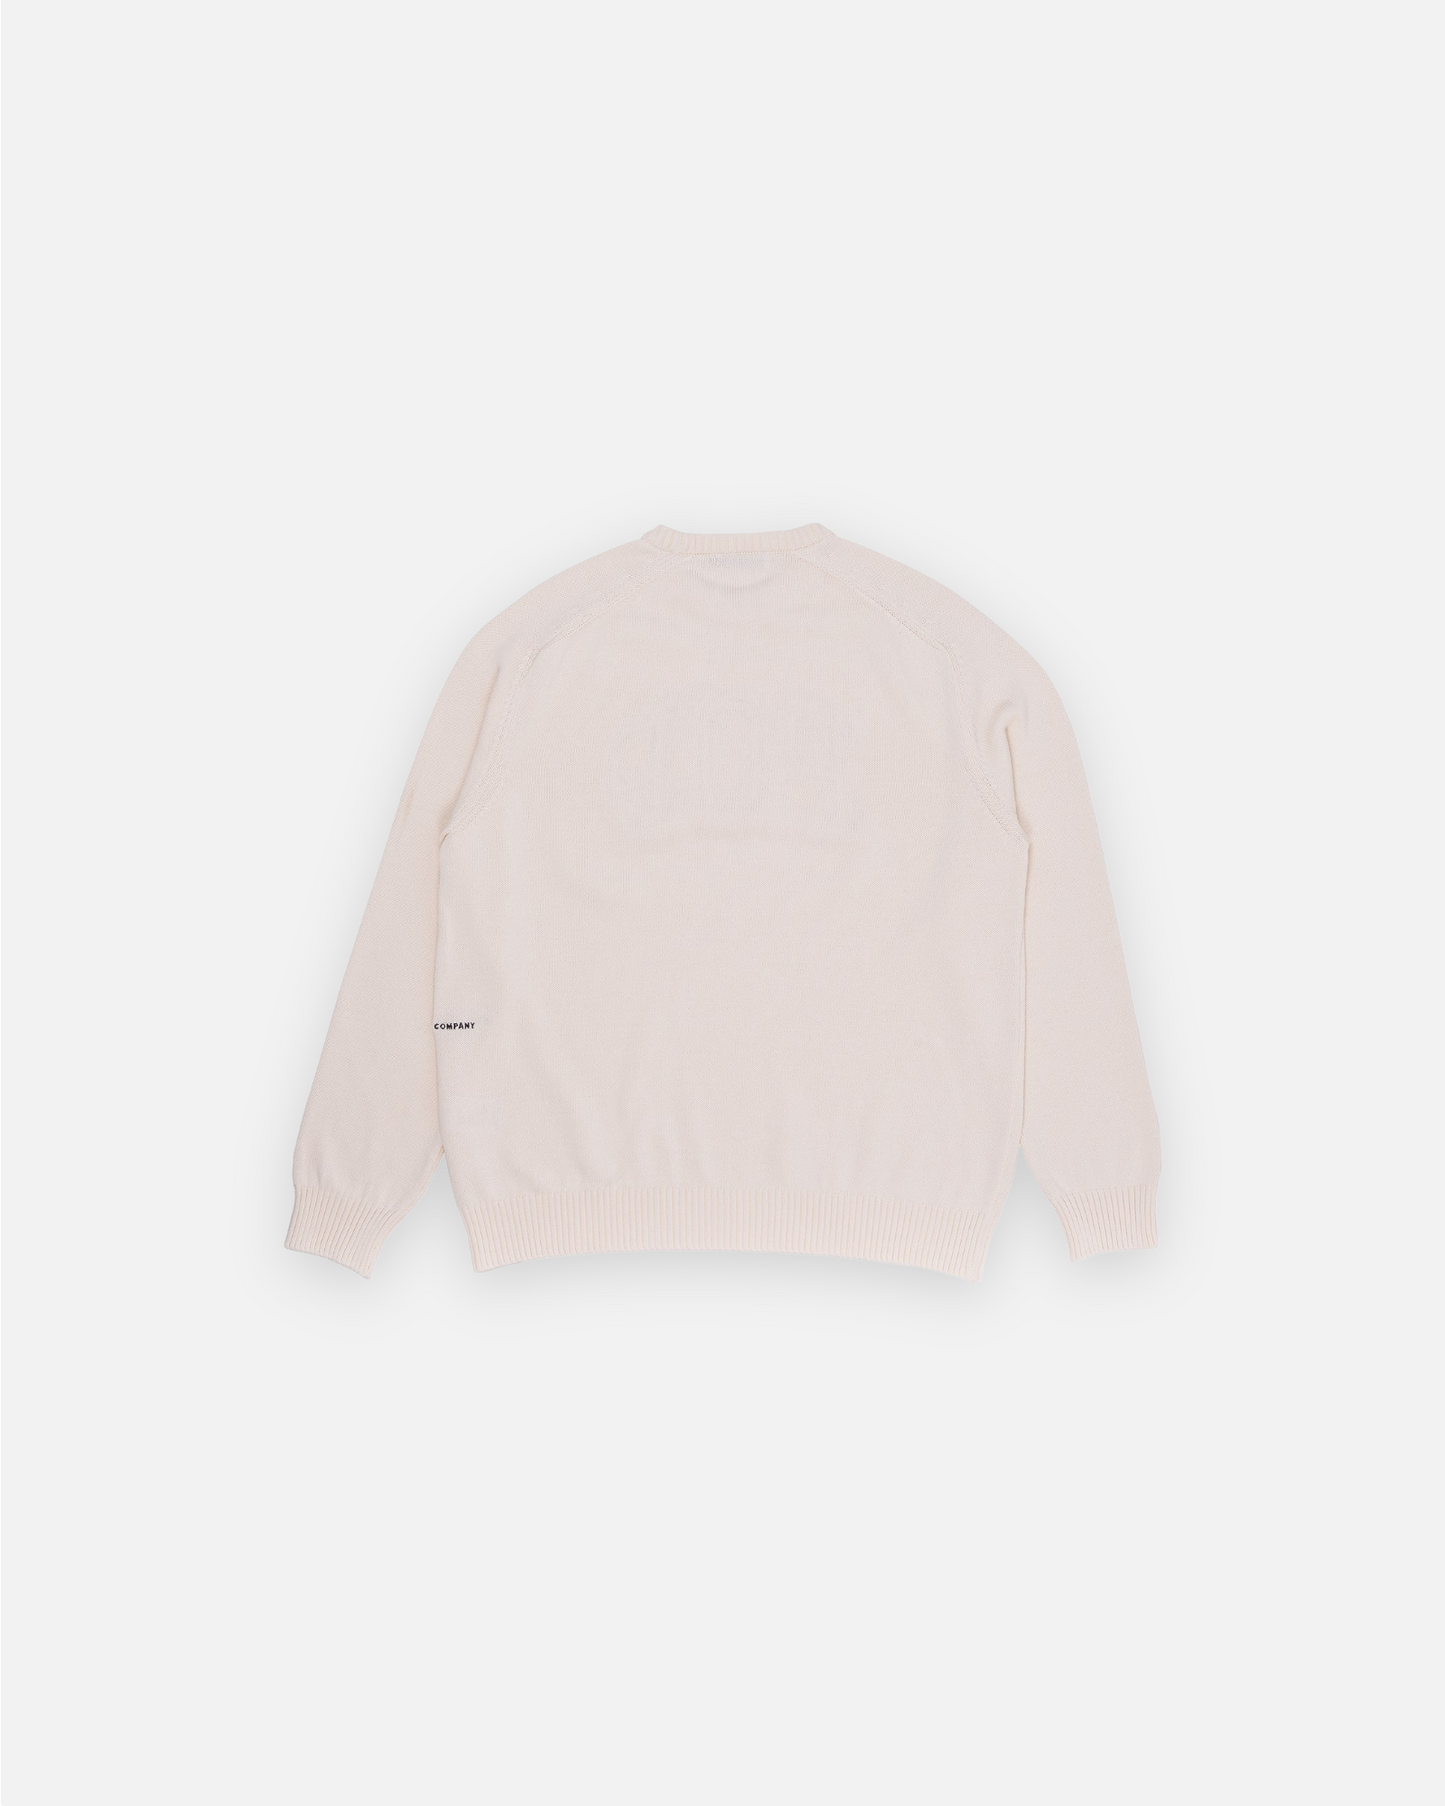 POP ARCH KNITTED CREWNECK (OFF WHITE)